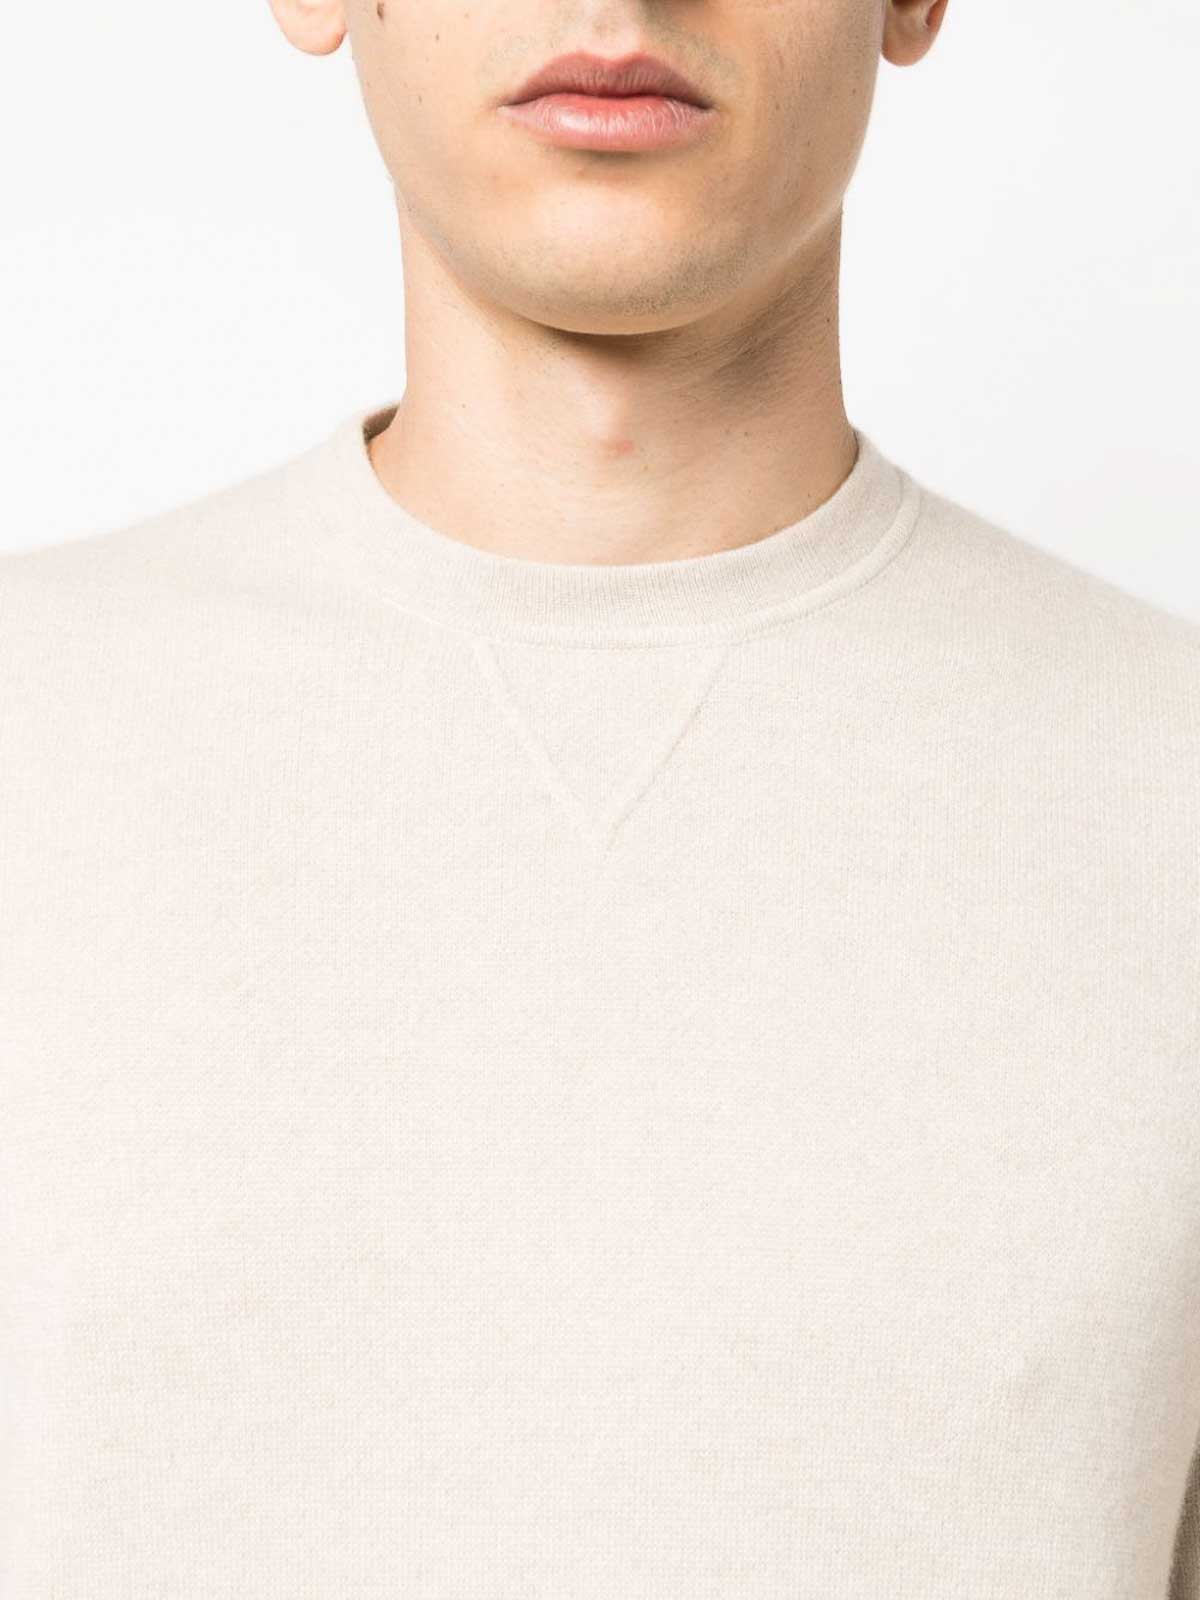 Shop Colombo Cashmere Crewneck Sweater In Beige